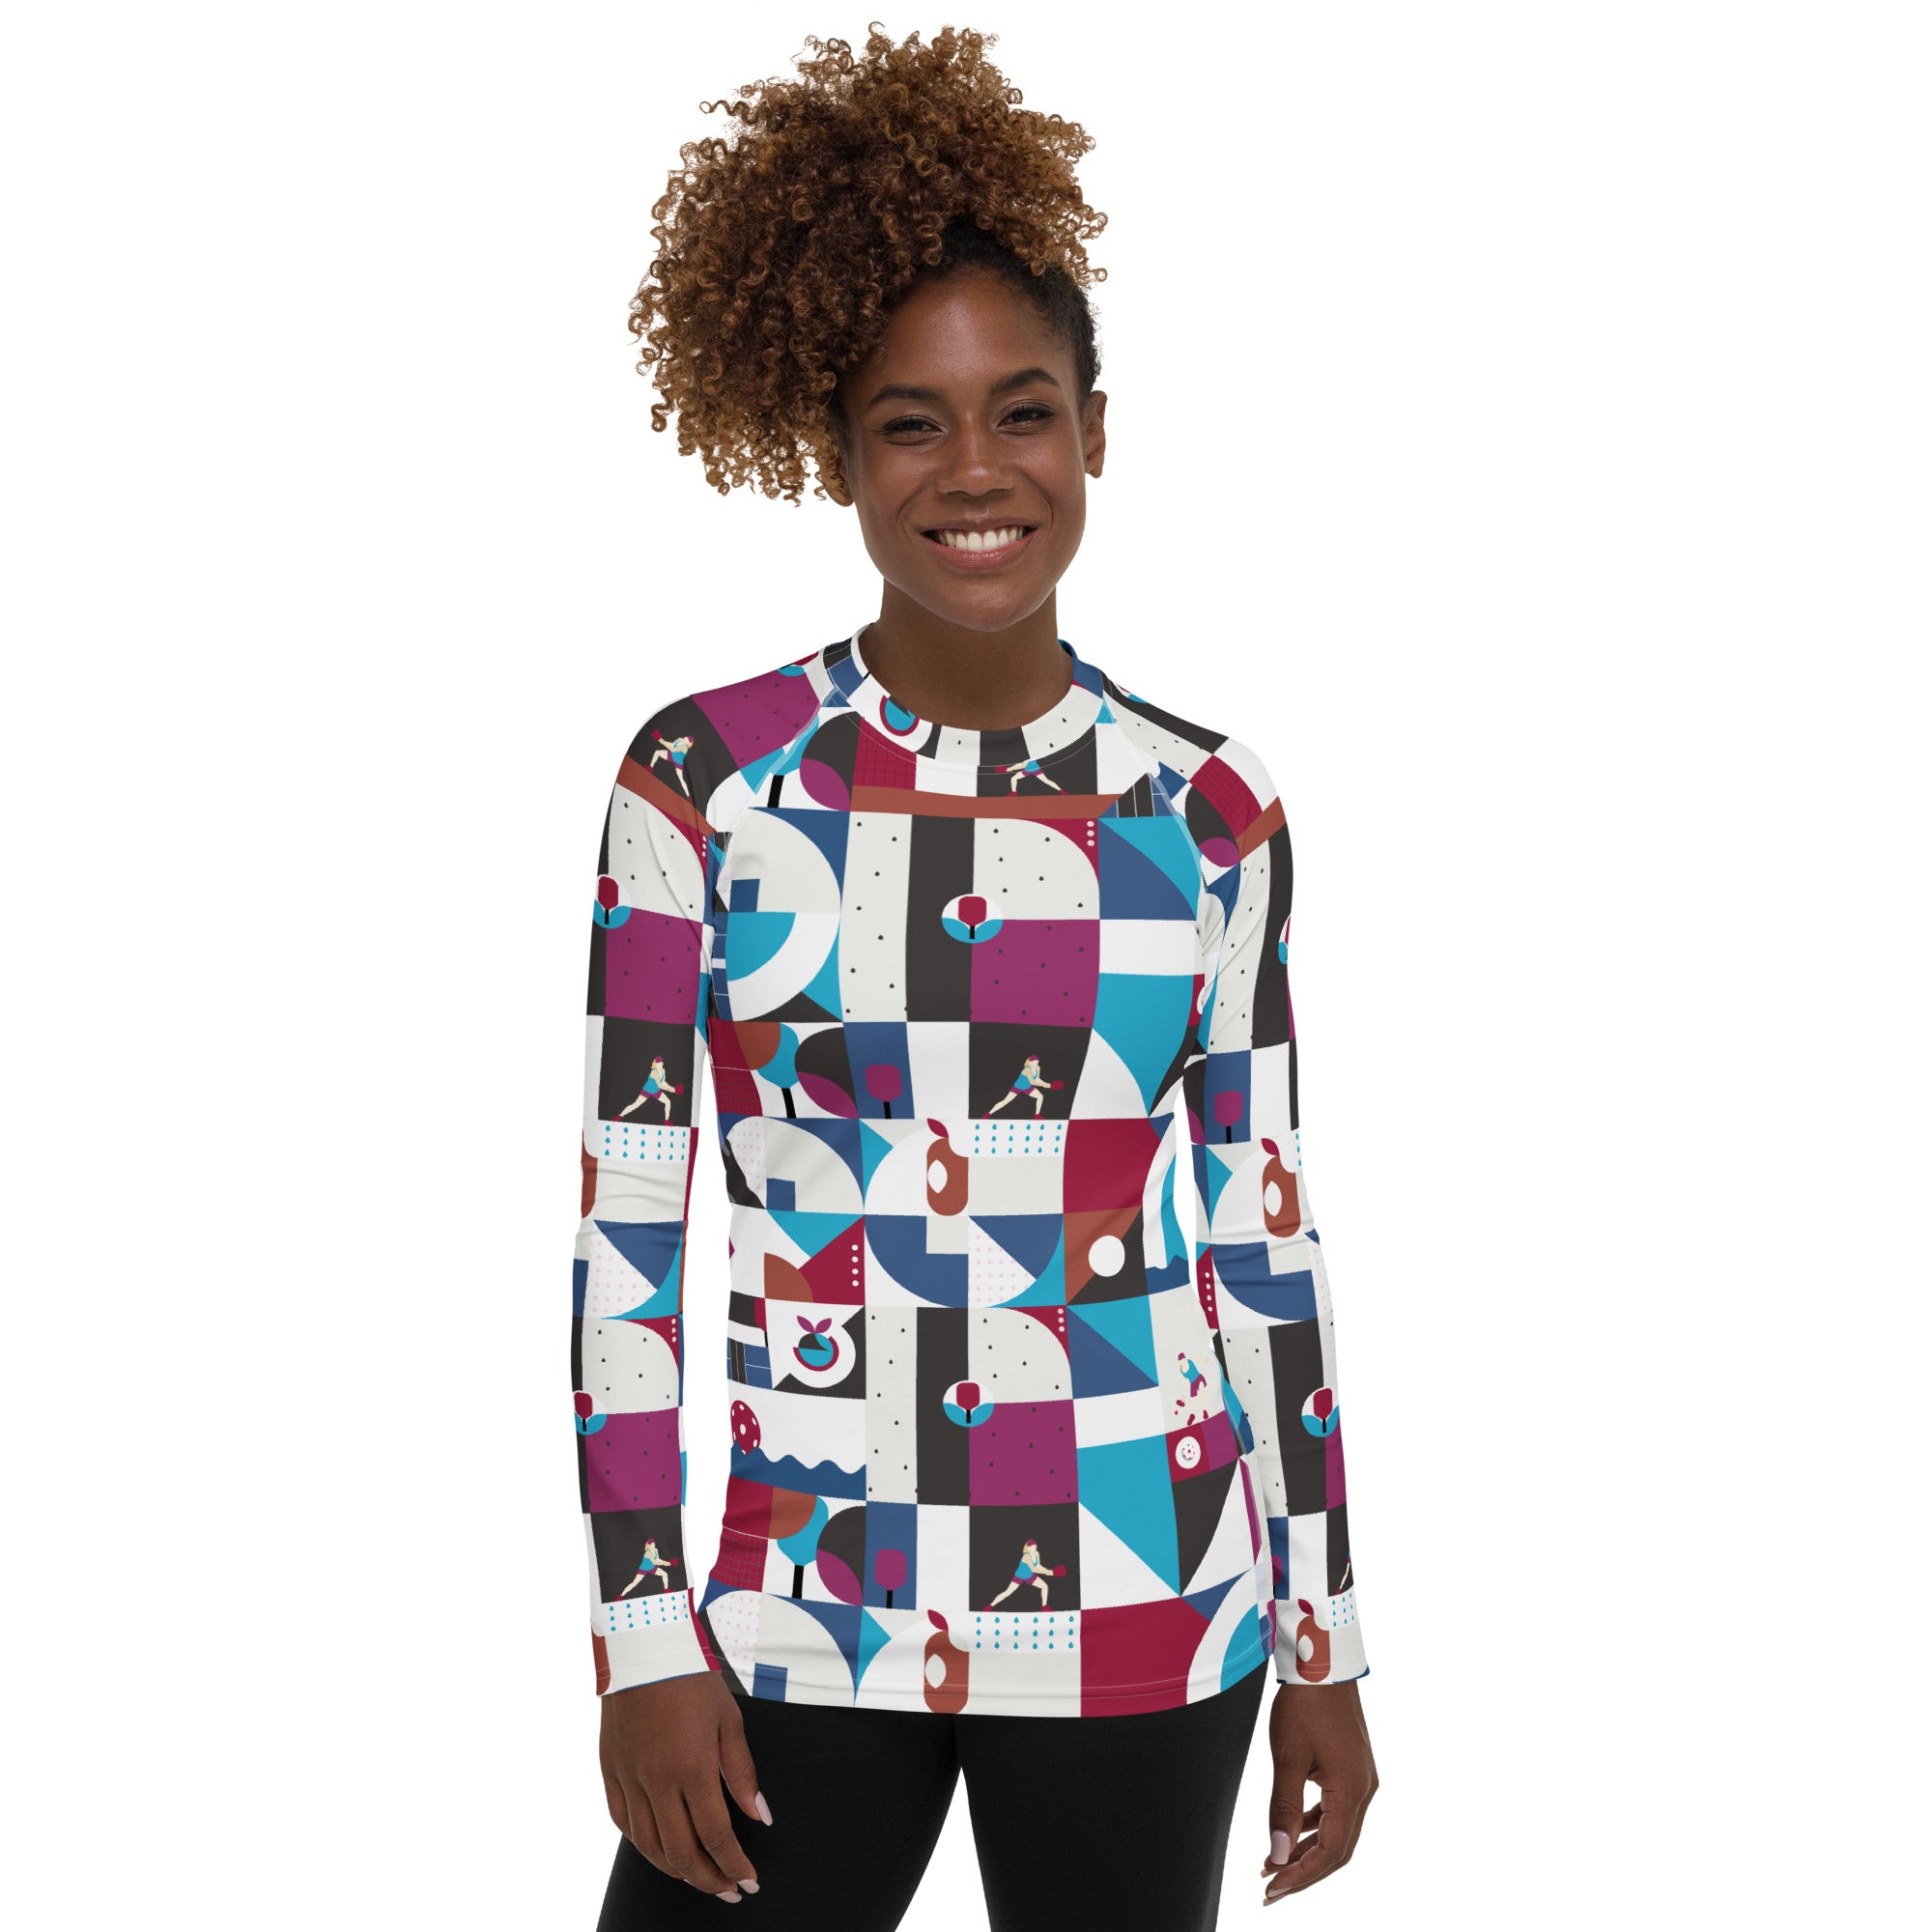 Dink & Drive under the Hopeful Discordance© Women's Performance Long Sleeve Shirt for Pickleball Enthusiasts, UPF 50+